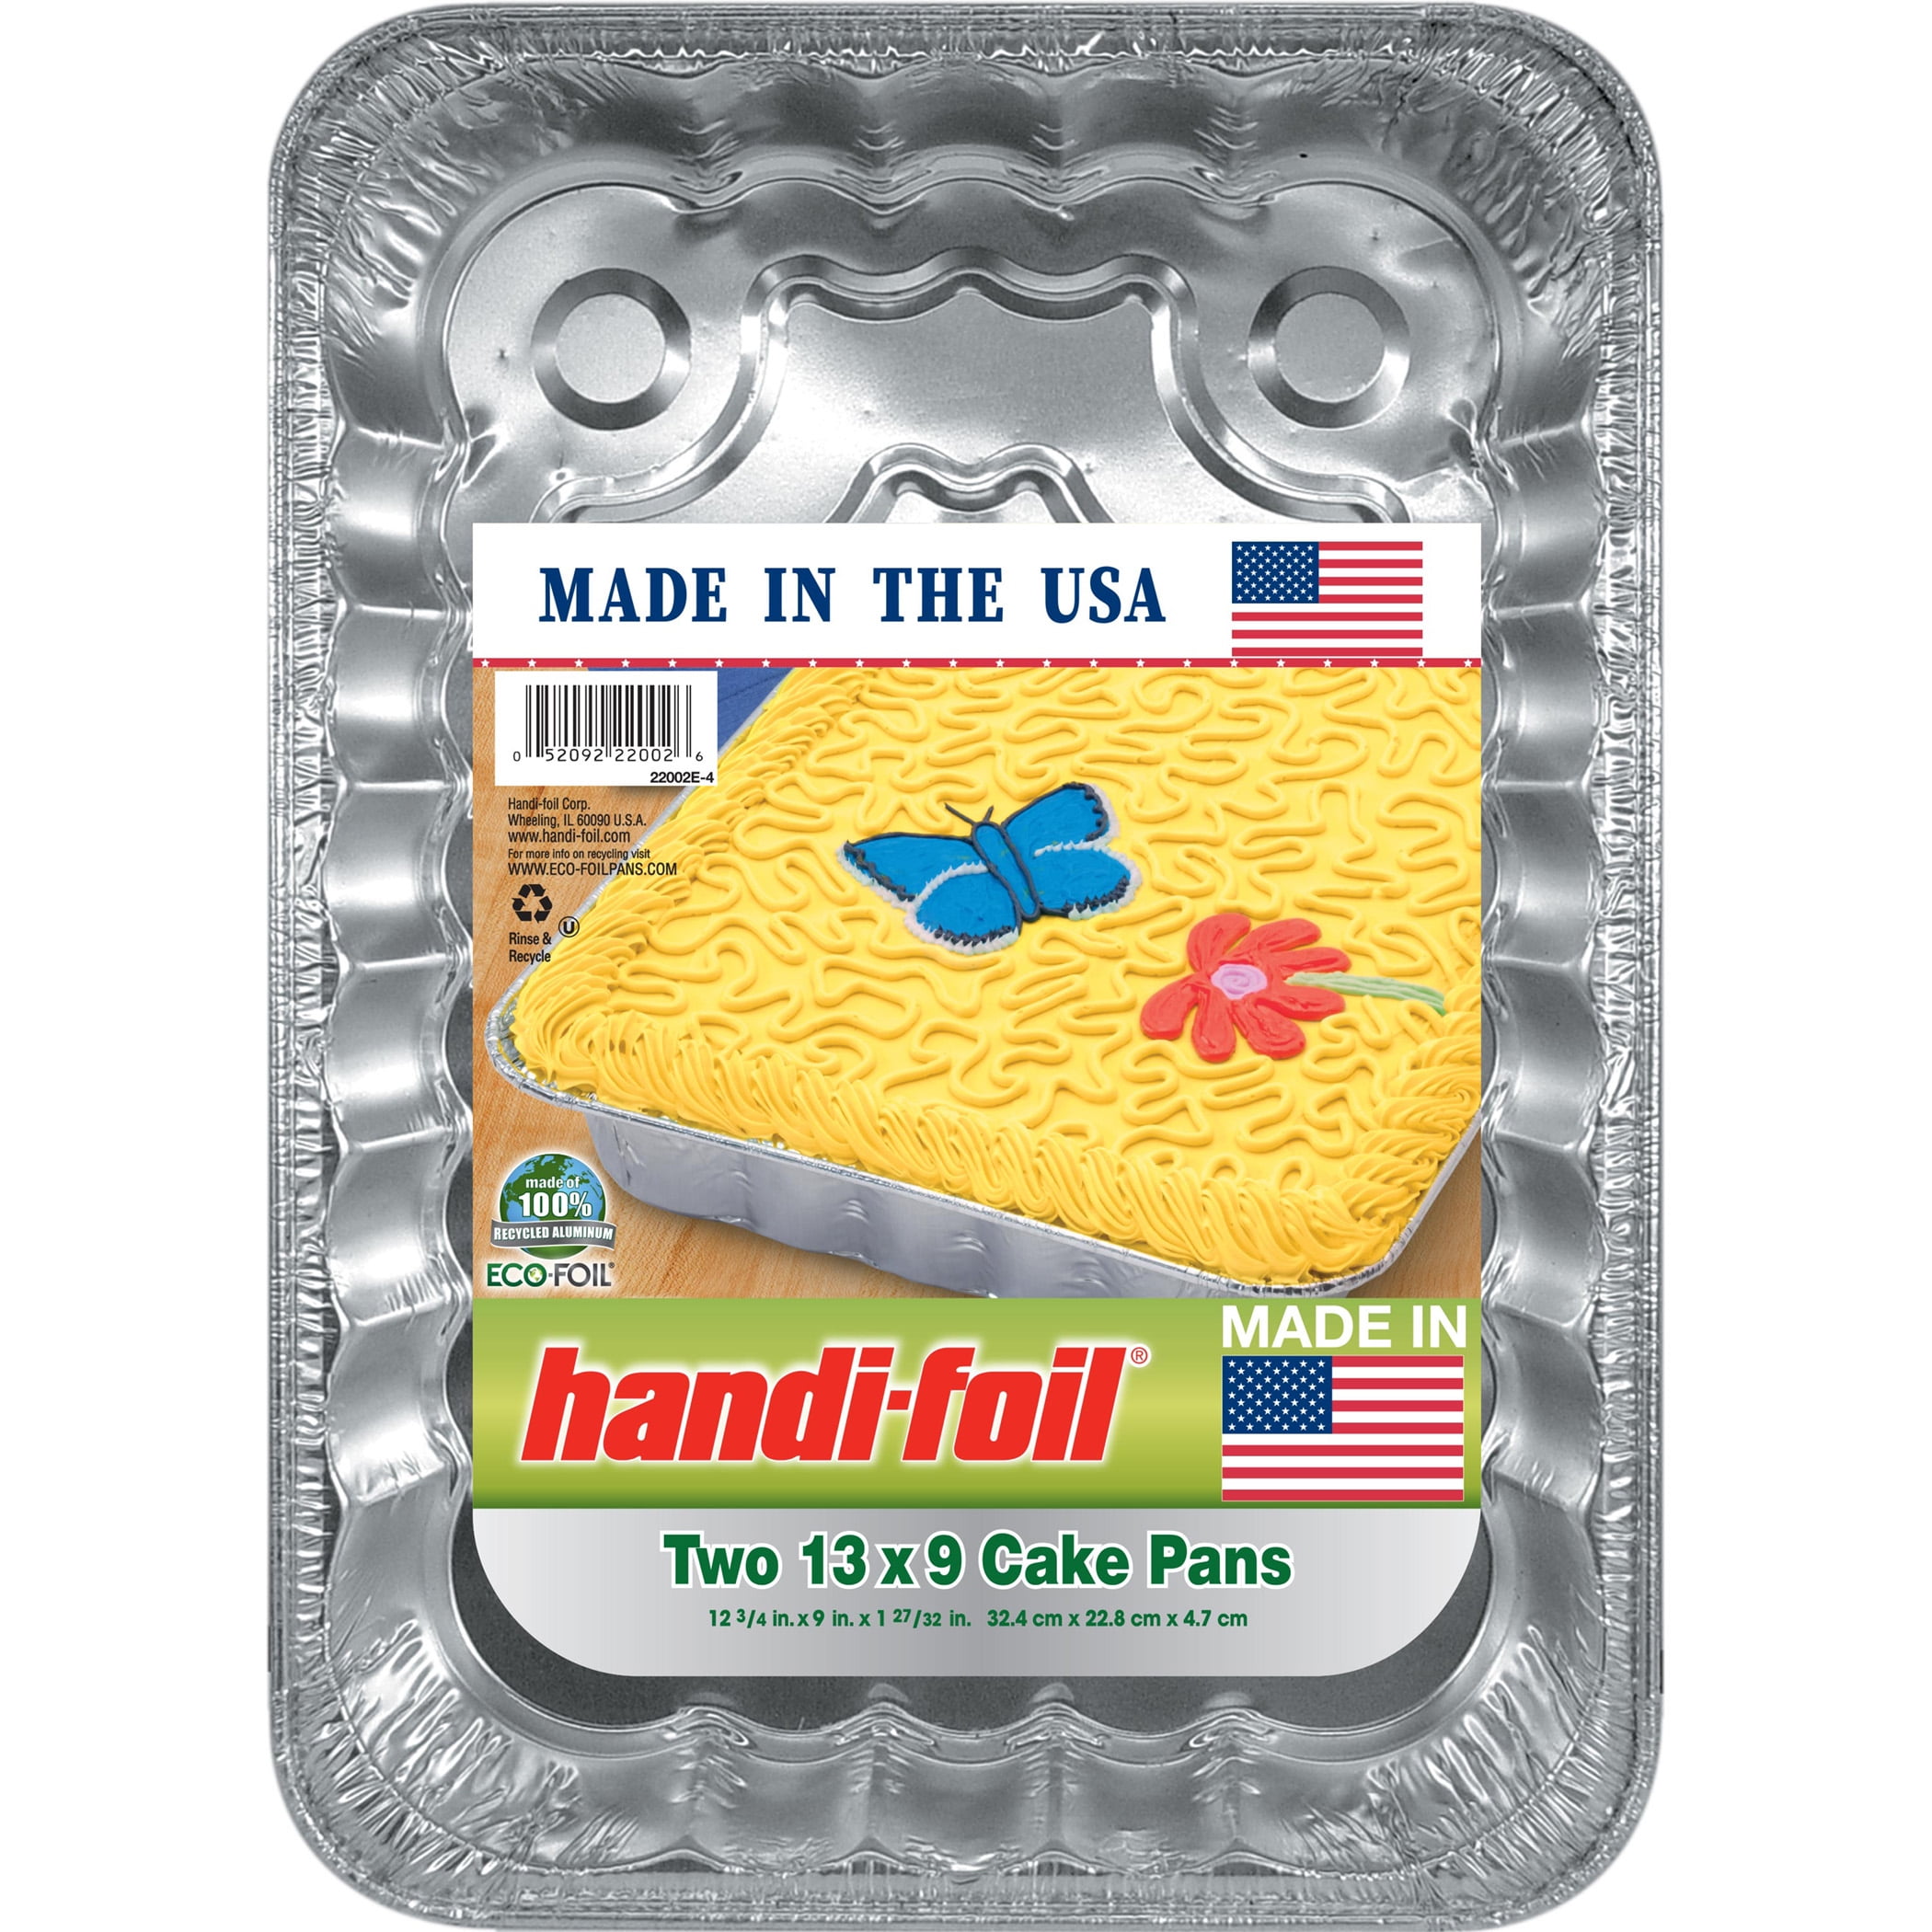 Find Handi-foil product to fit your baking needs! All featured products